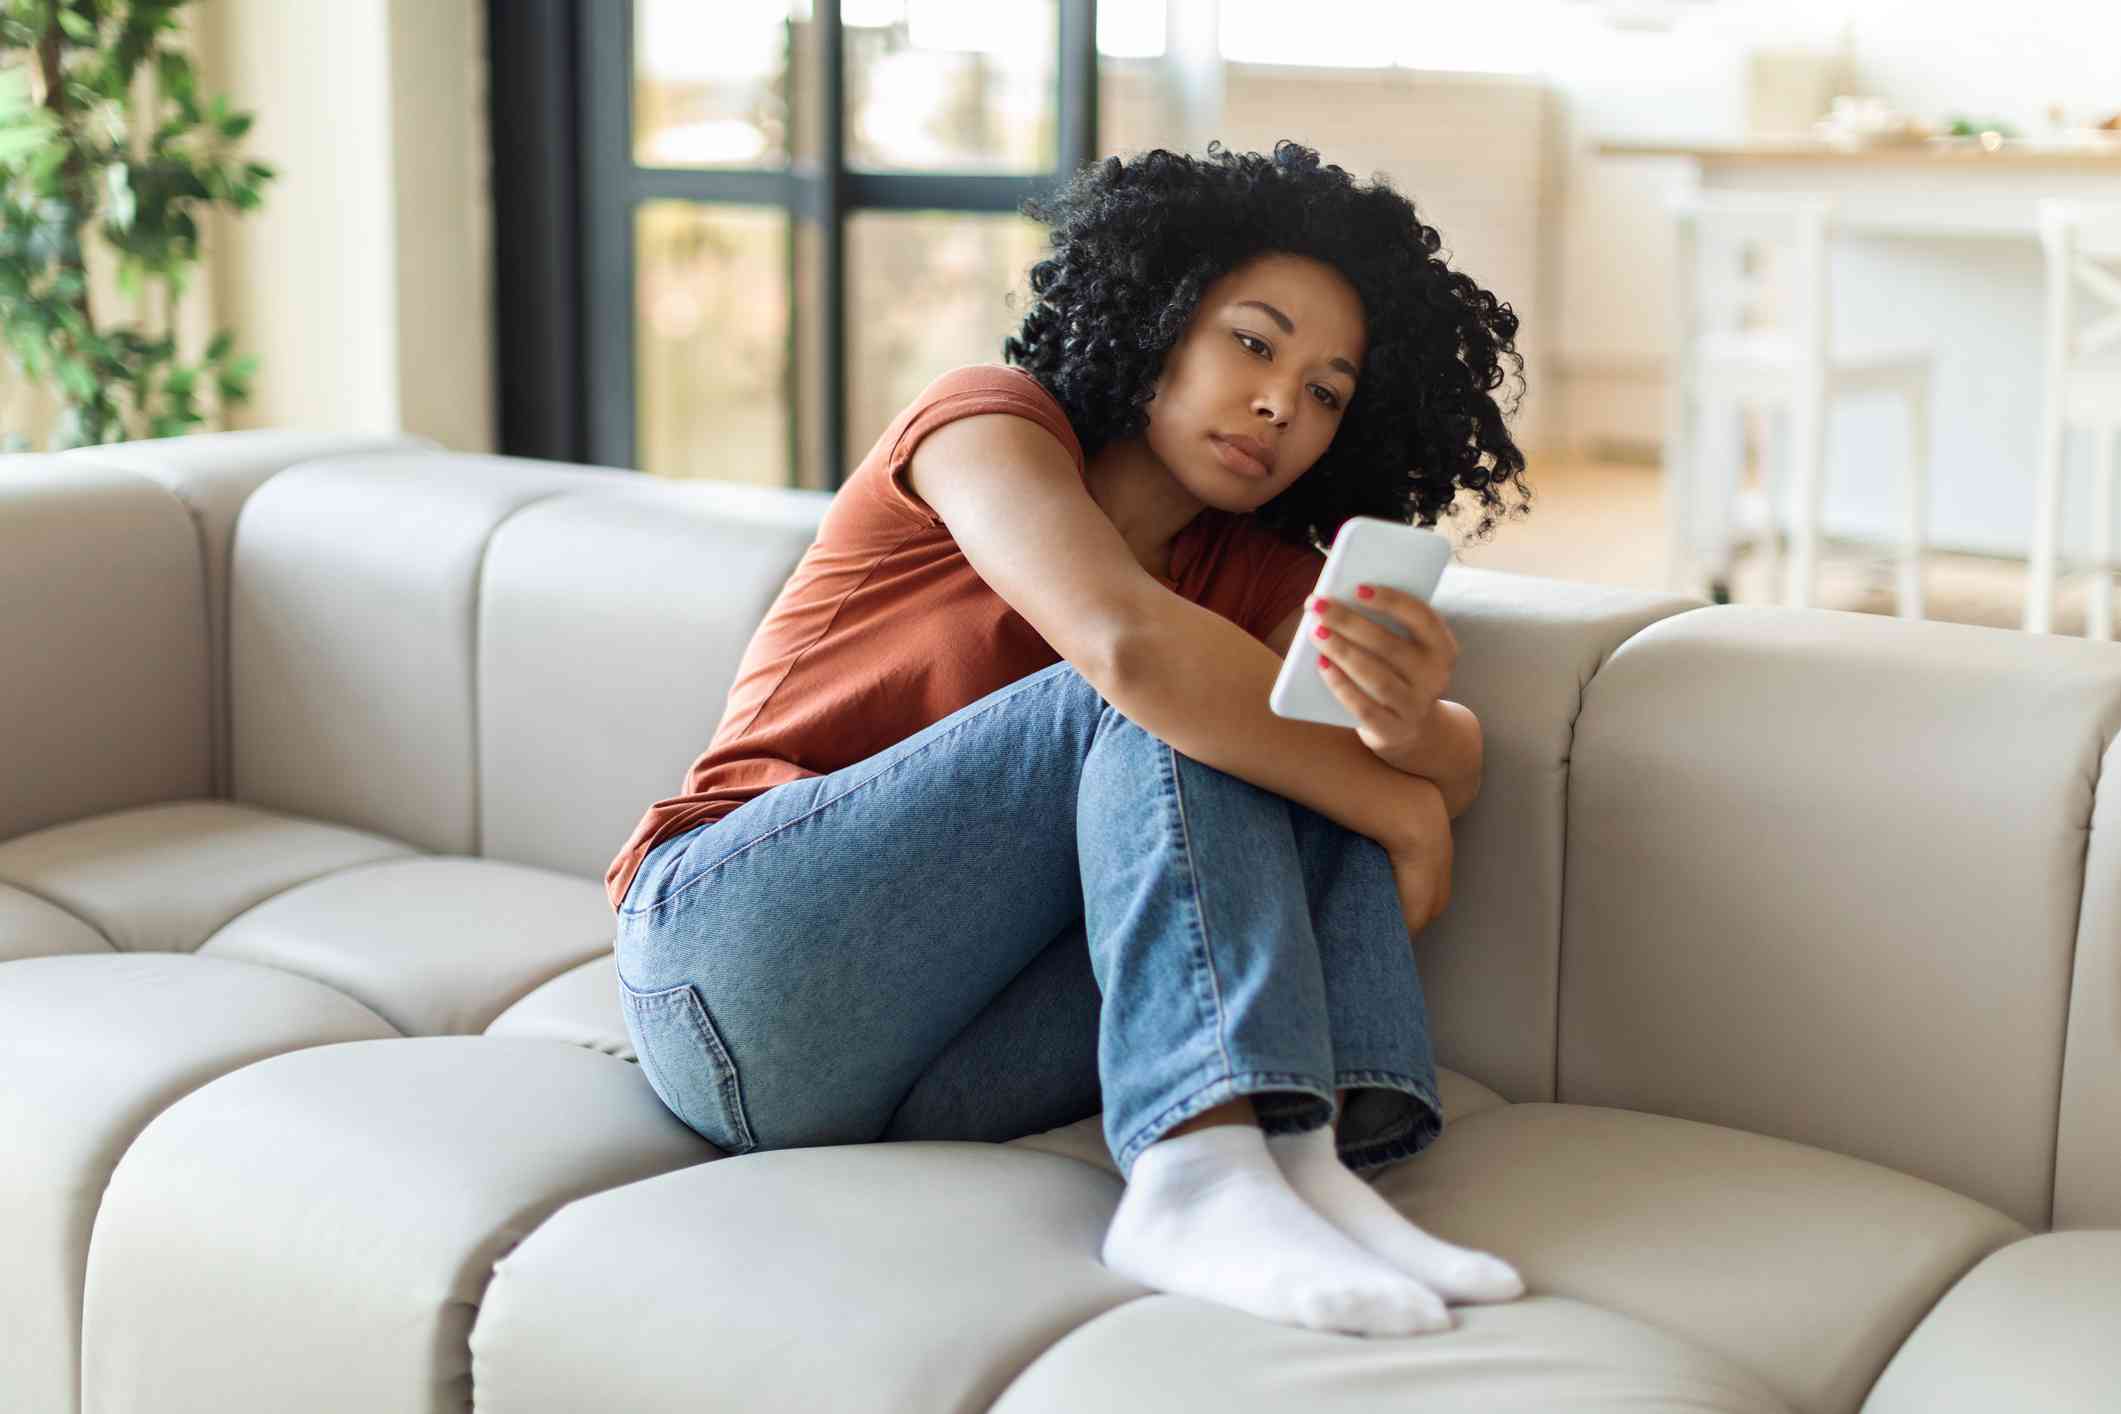 A woman in an orange shirt sits curled up on the couch and sadly looks at the cellphone in her hand.